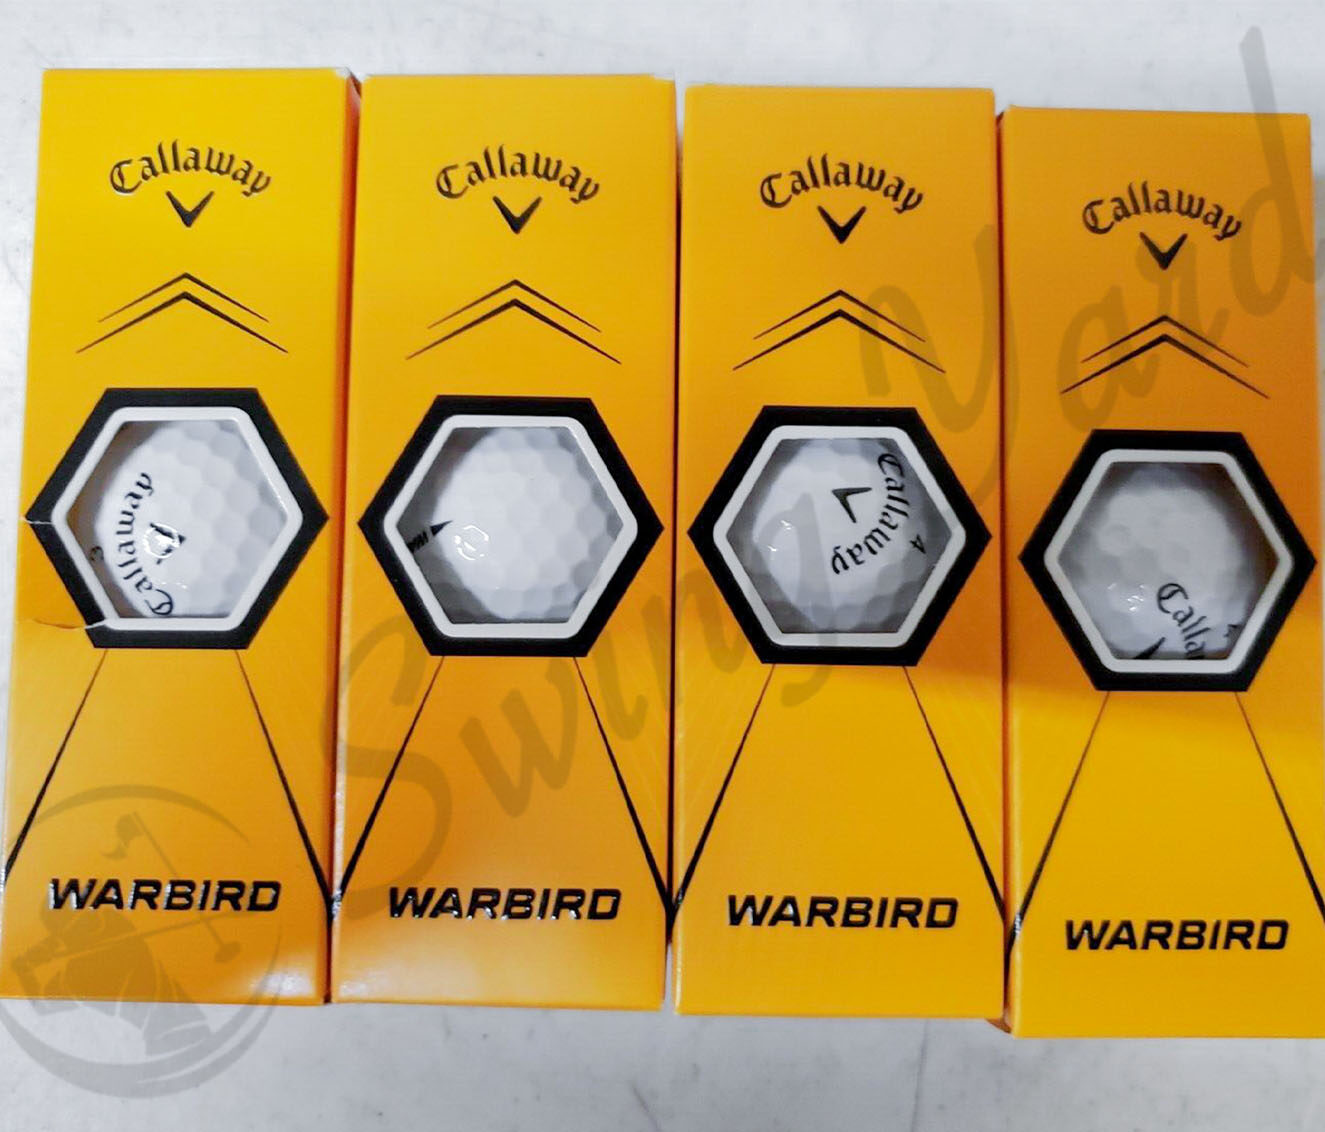 The 4 packs of Callaway Warbird 4 packs on the table